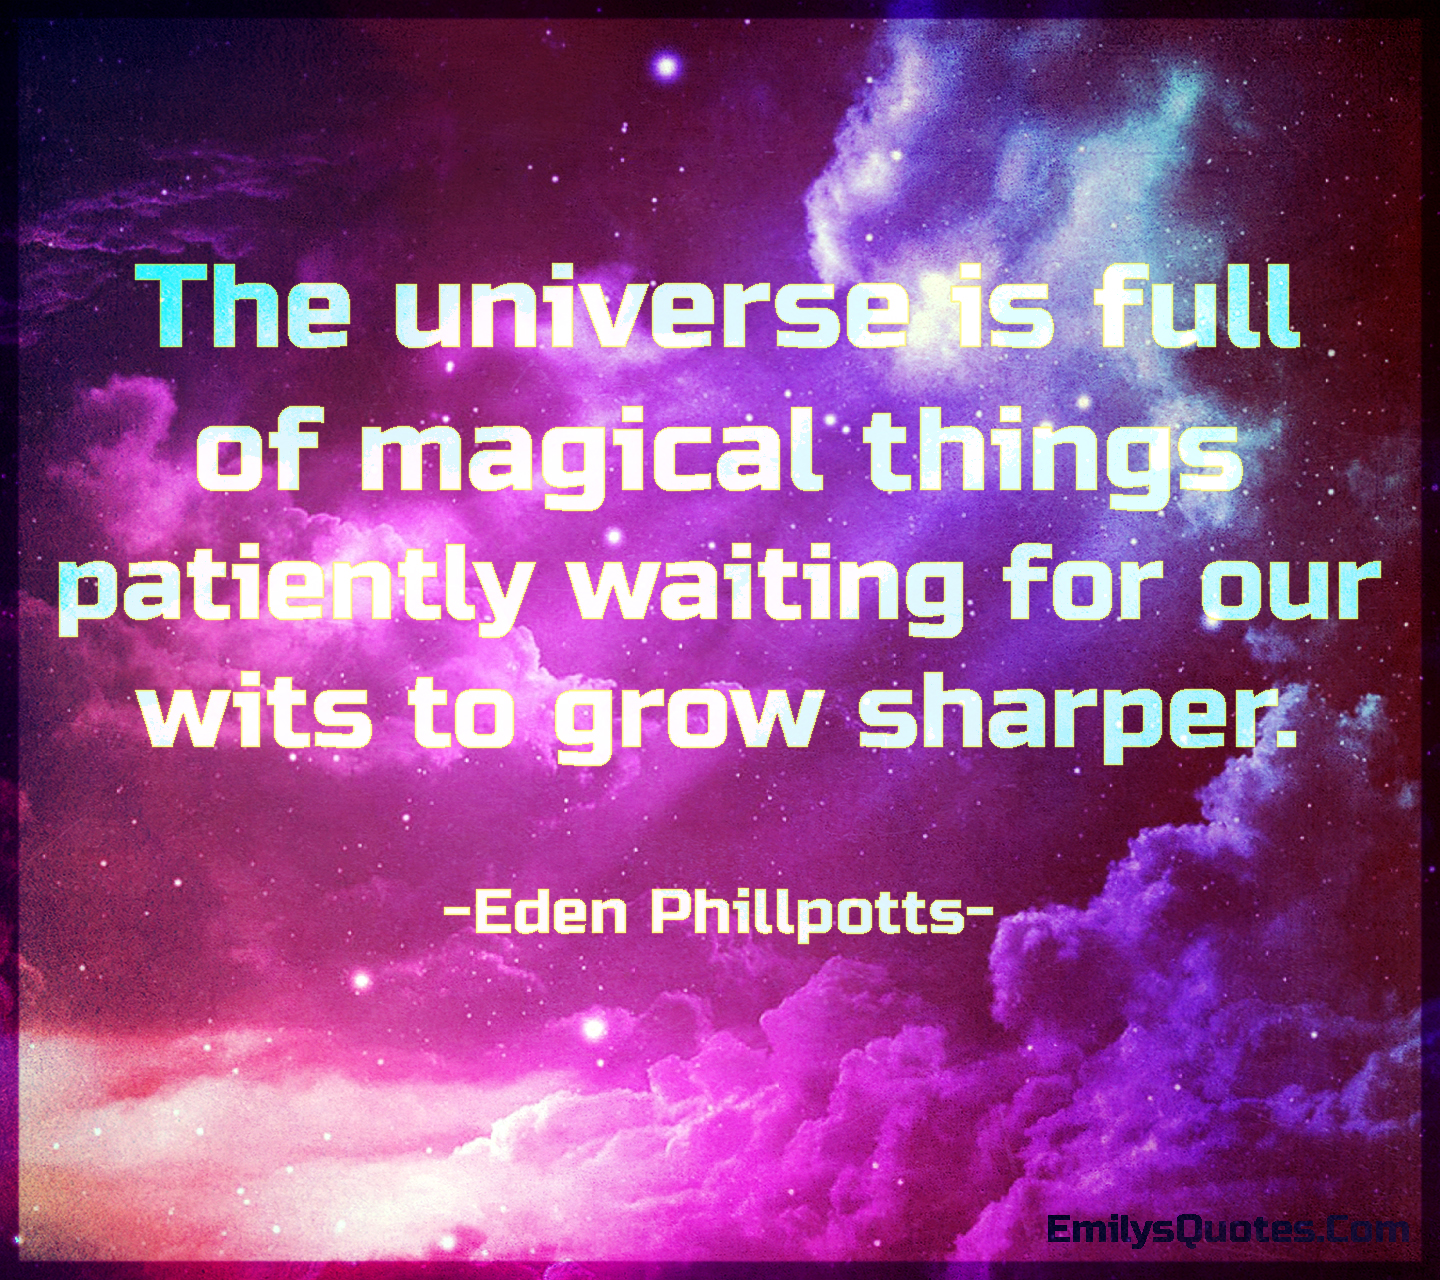 The universe is full of magical things patiently waiting for our wits to grow sharper